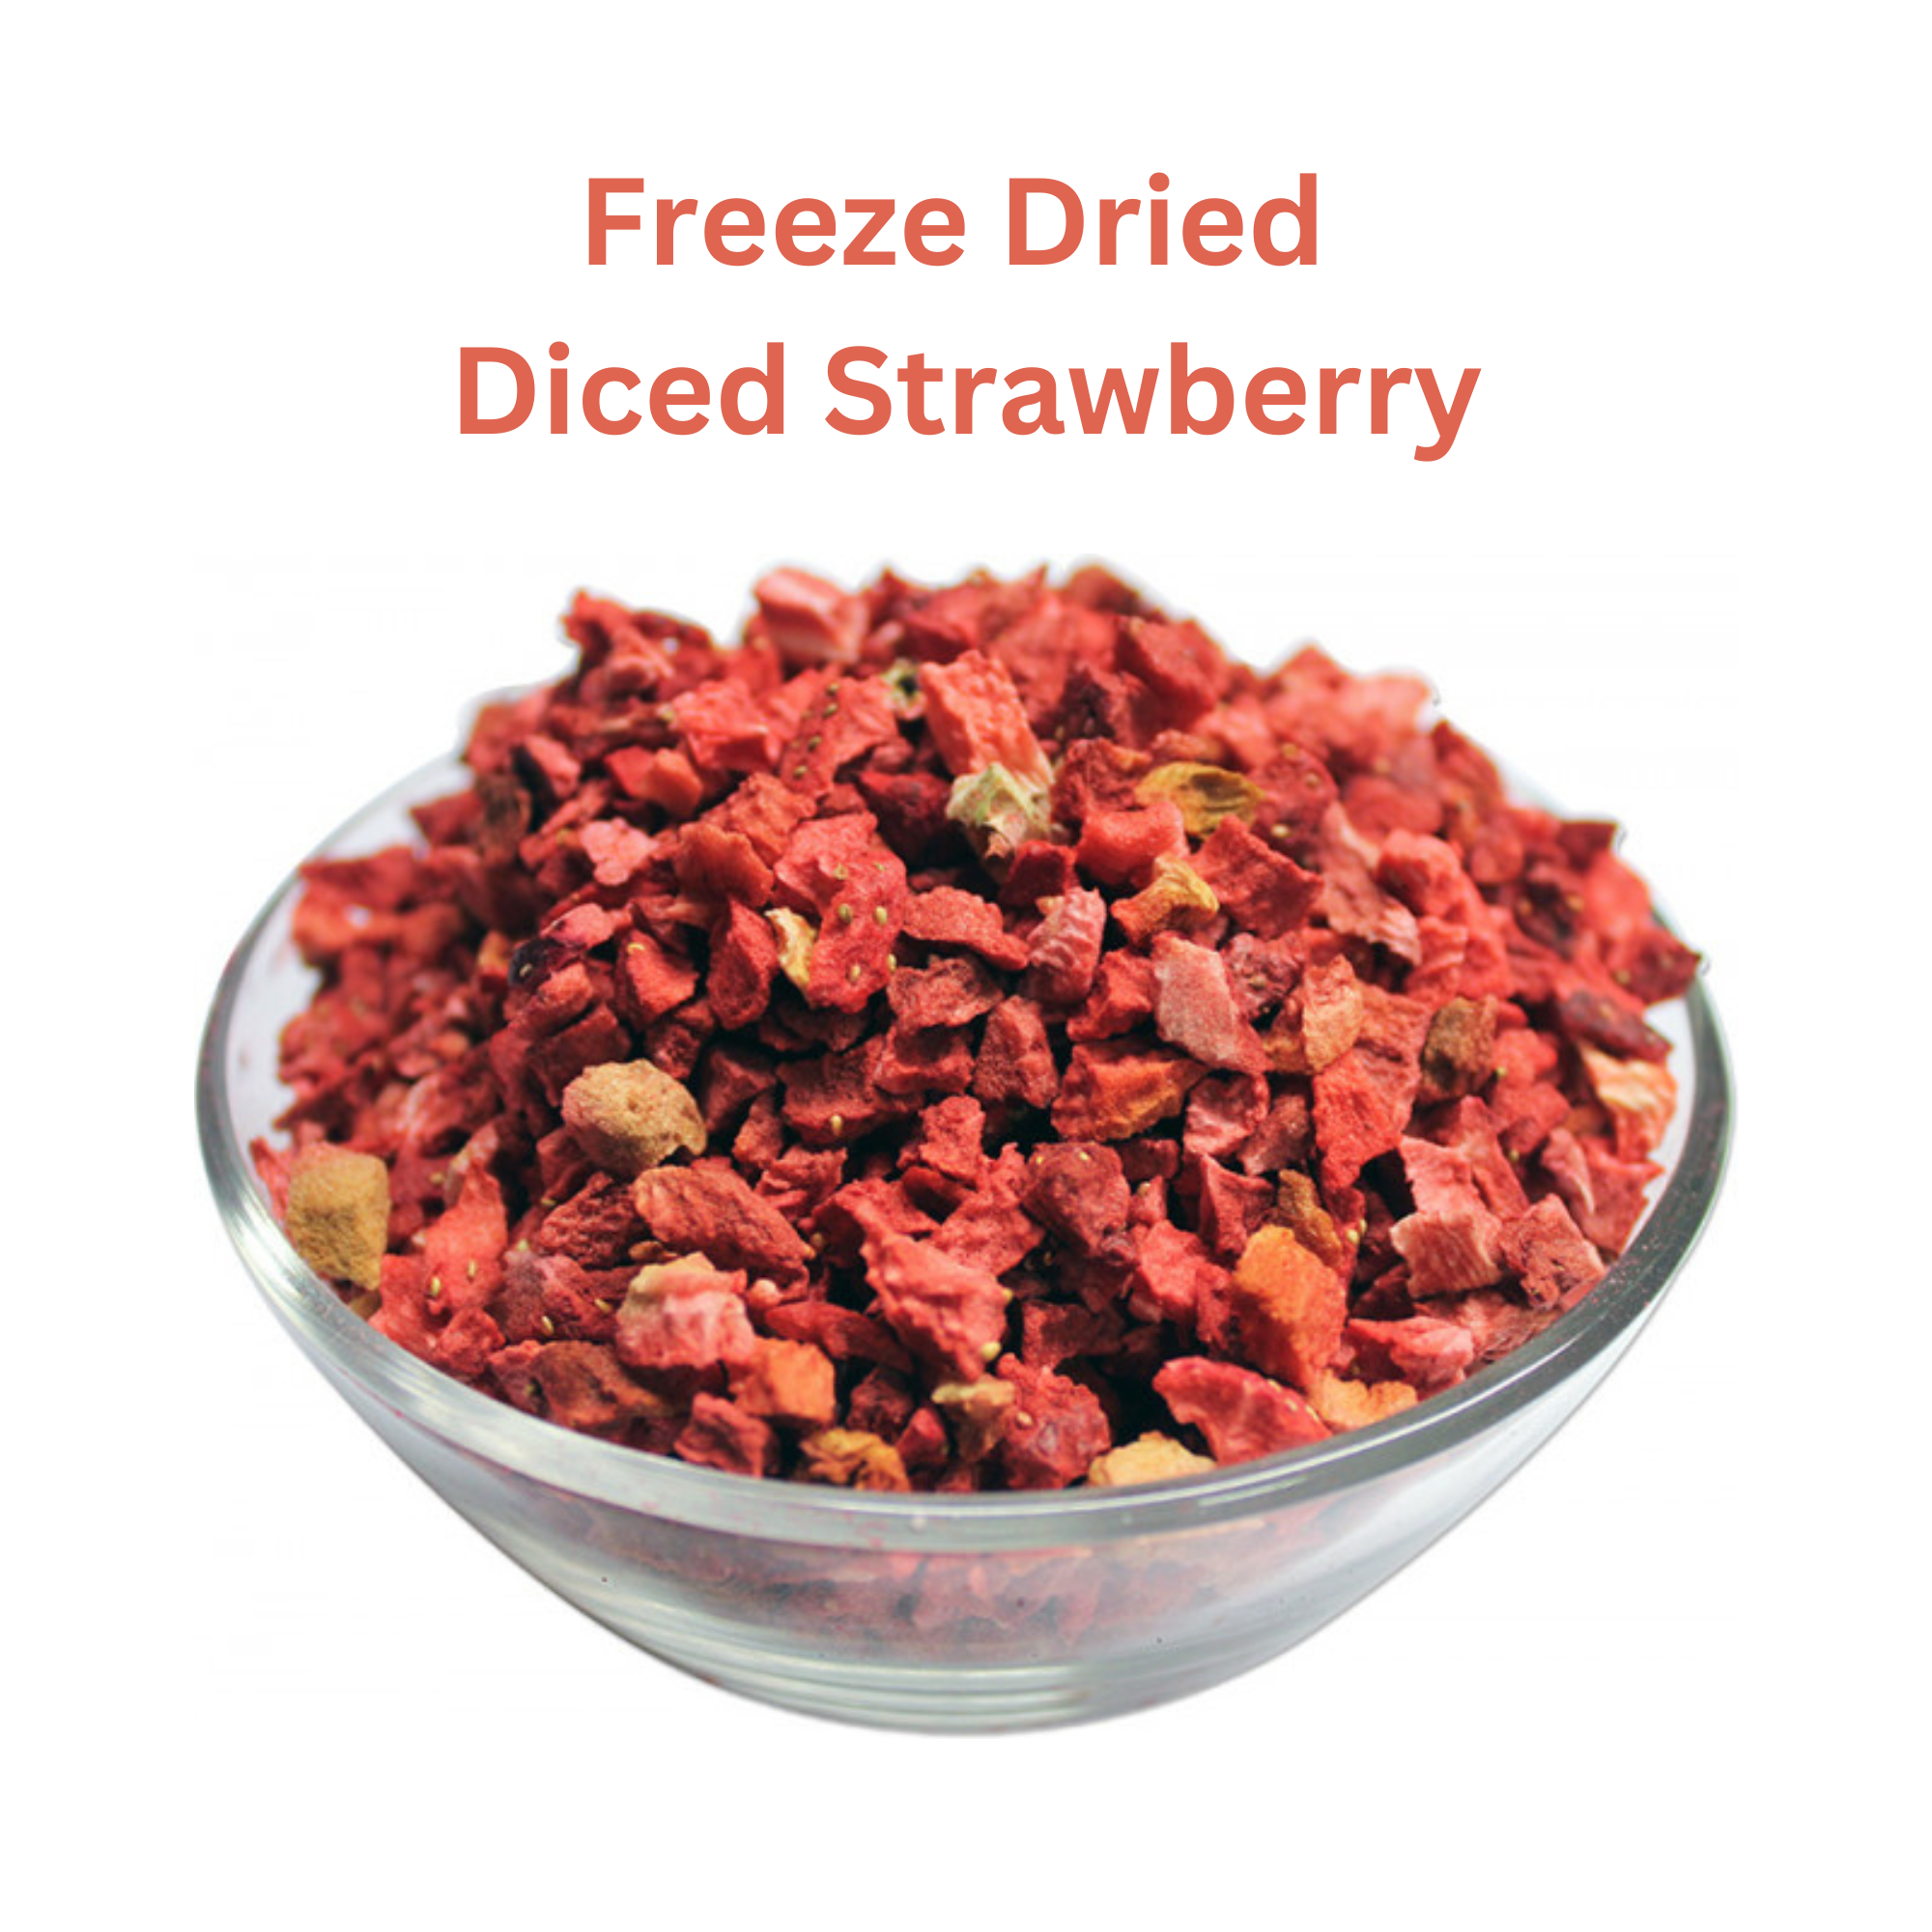 Nim’s Diced Strawberry Freeze Dried 100g – 100% Natural, No Added Sugar or Preservatives **Free UK Delivery**